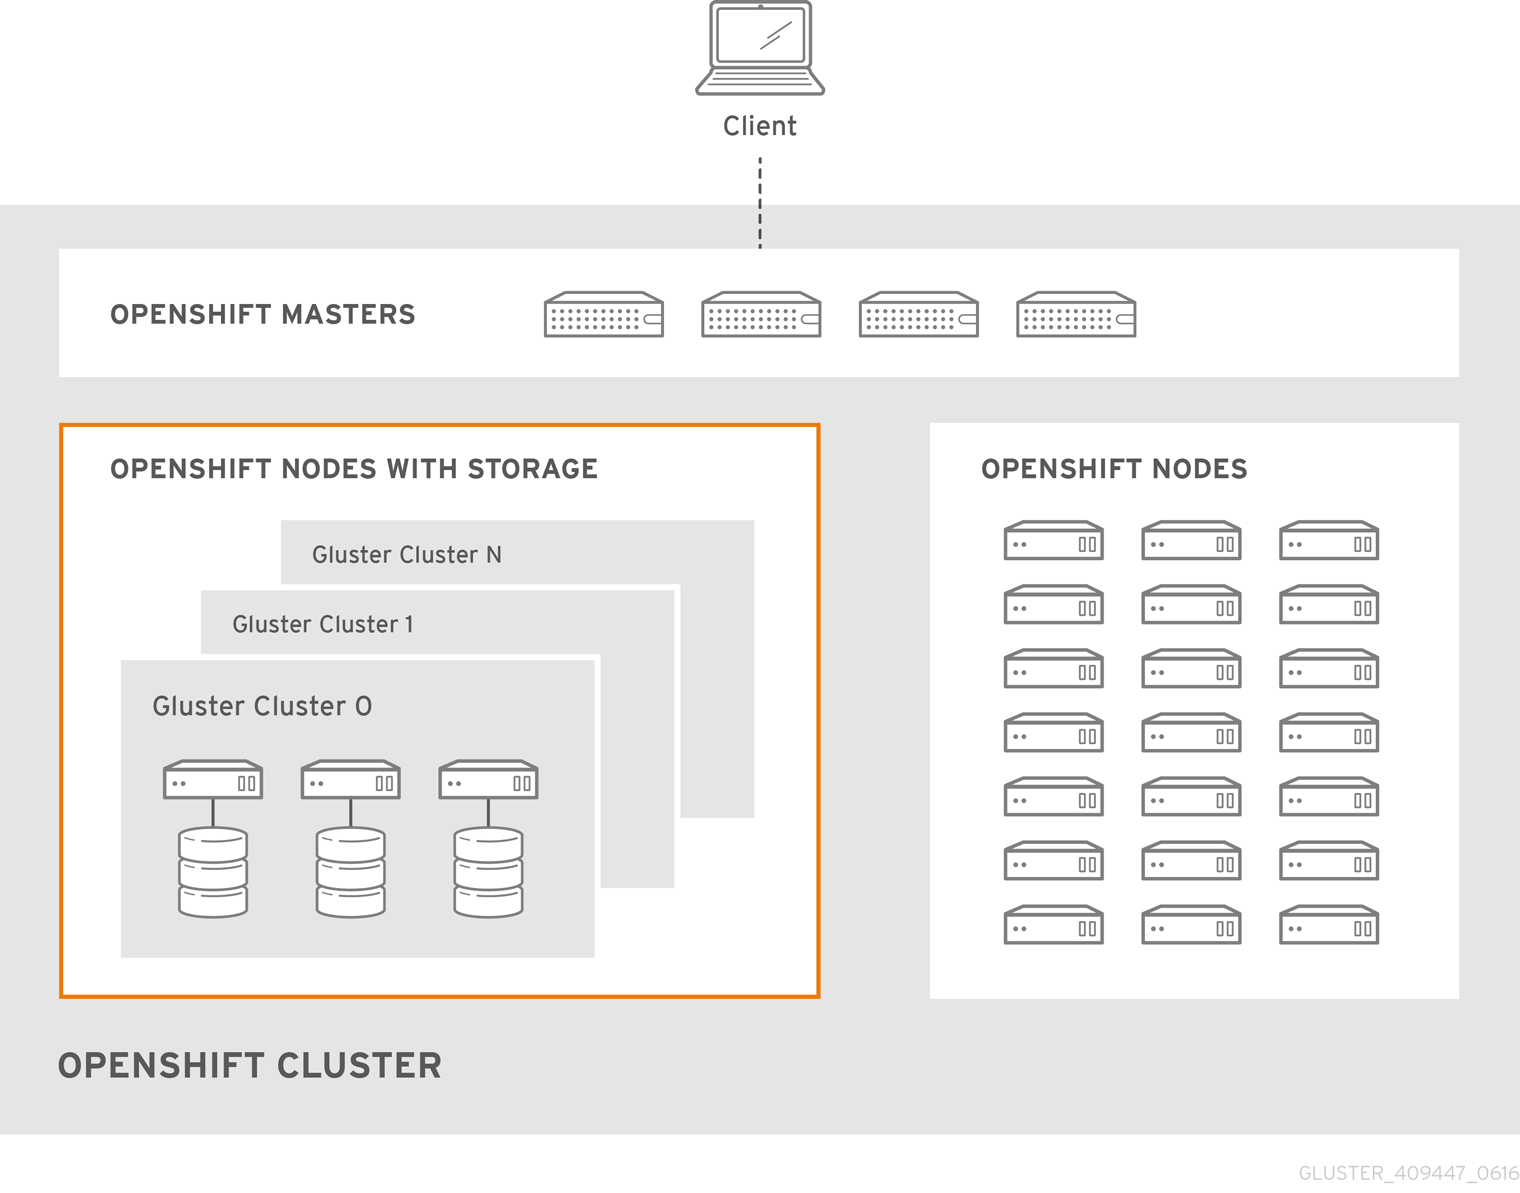 Architecture - Red Hat Gluster Storage Container Native with OpenShift Container Platform